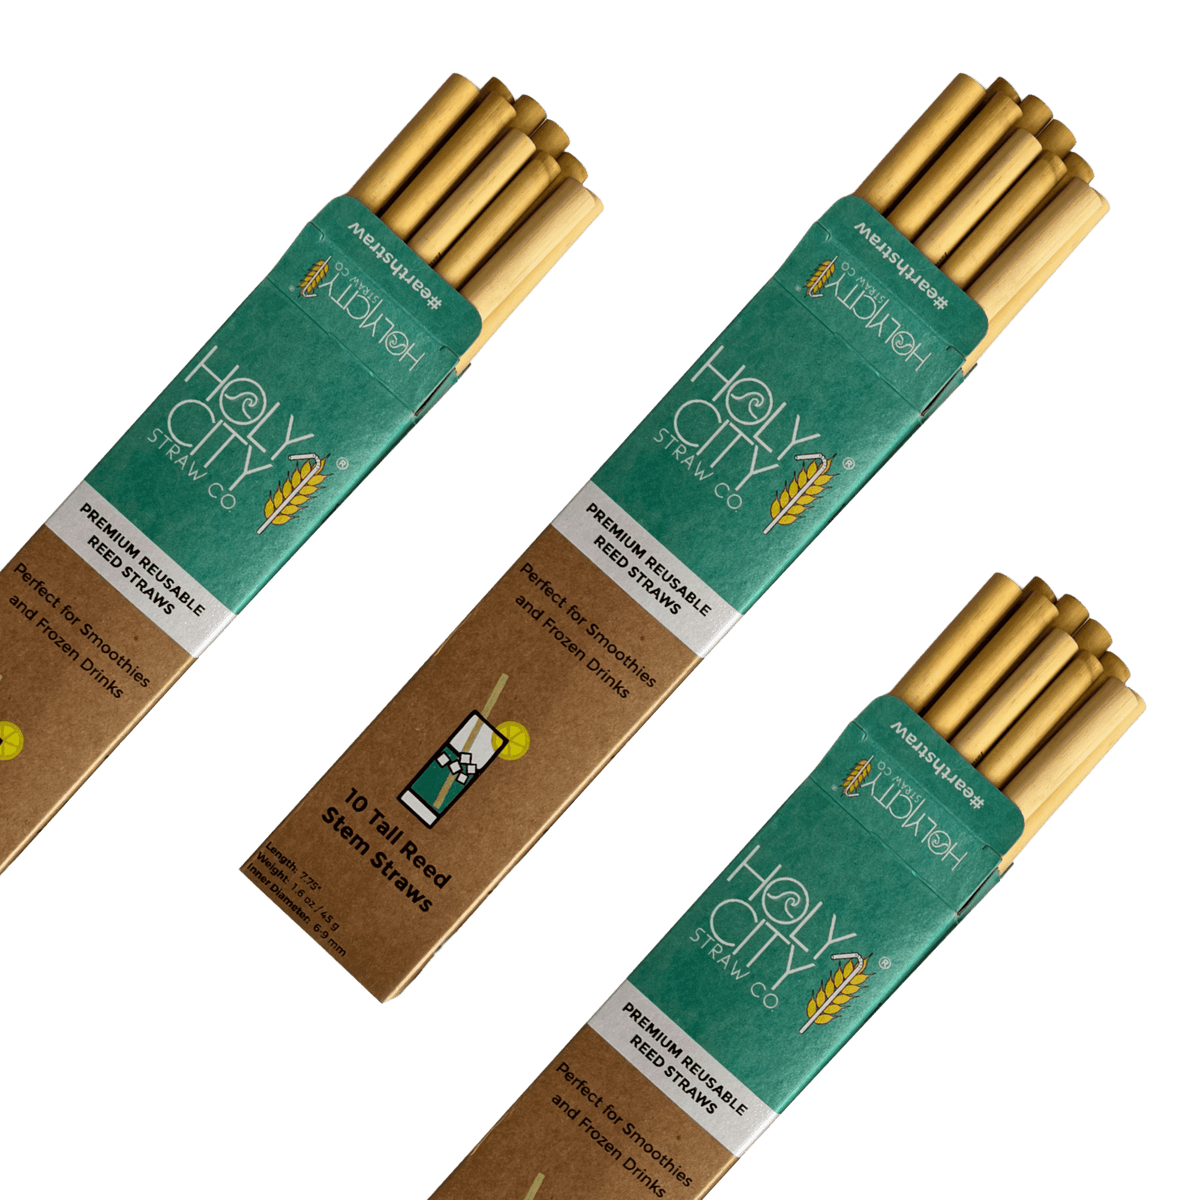 Tall Reusable Reed Straw Bundle - 3 Pack by Holy City Straw Company